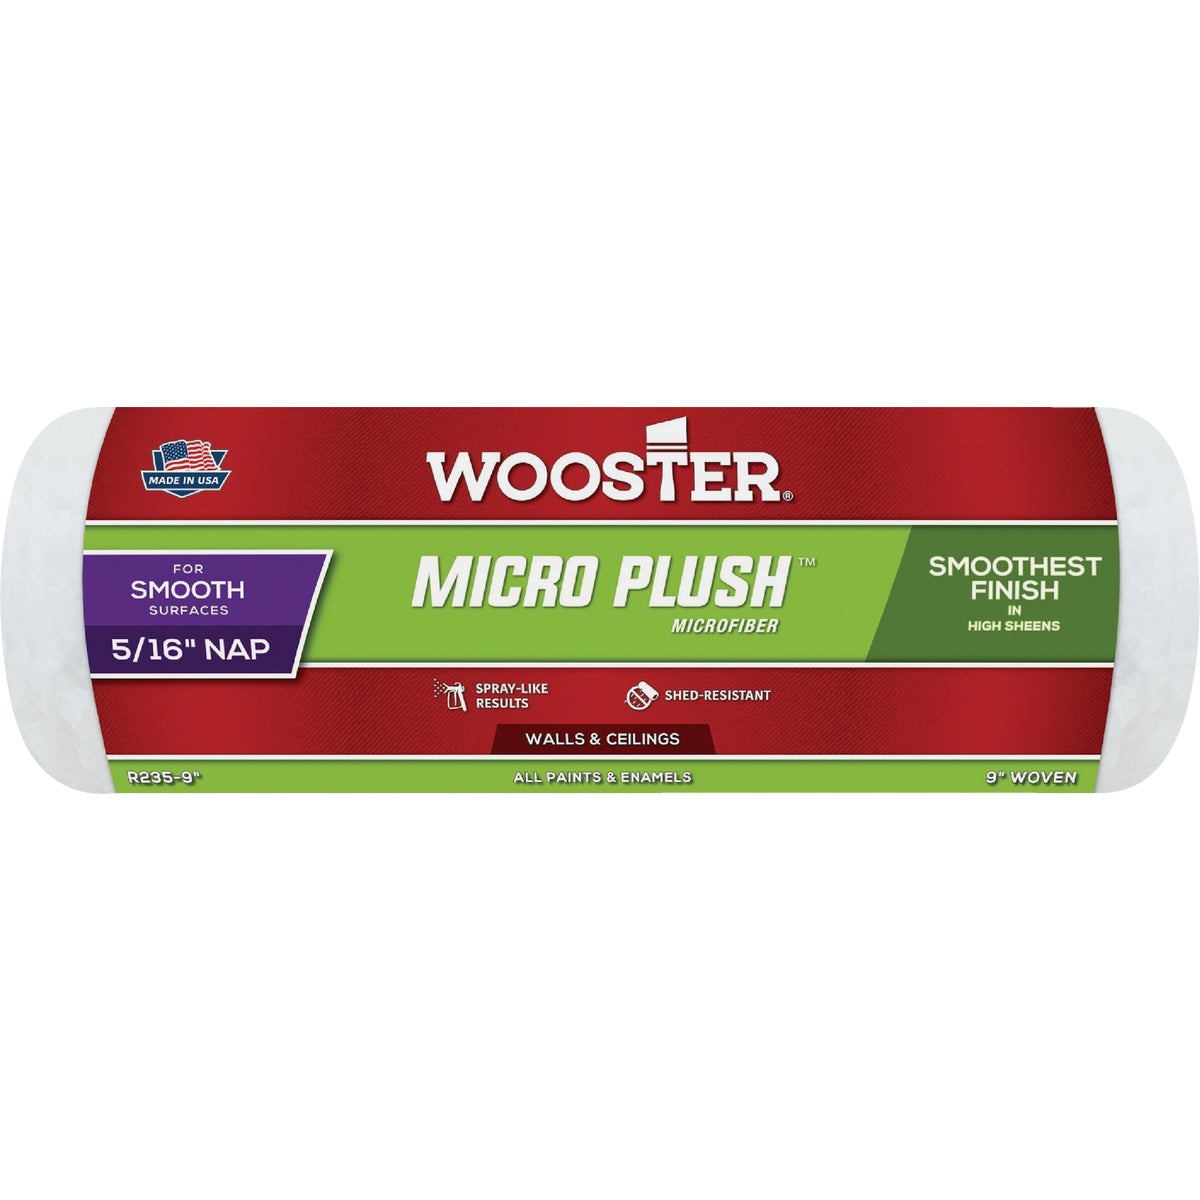 Wooster Micro Plush 9 In. x 5/16 In. Microfiber Roller Cover